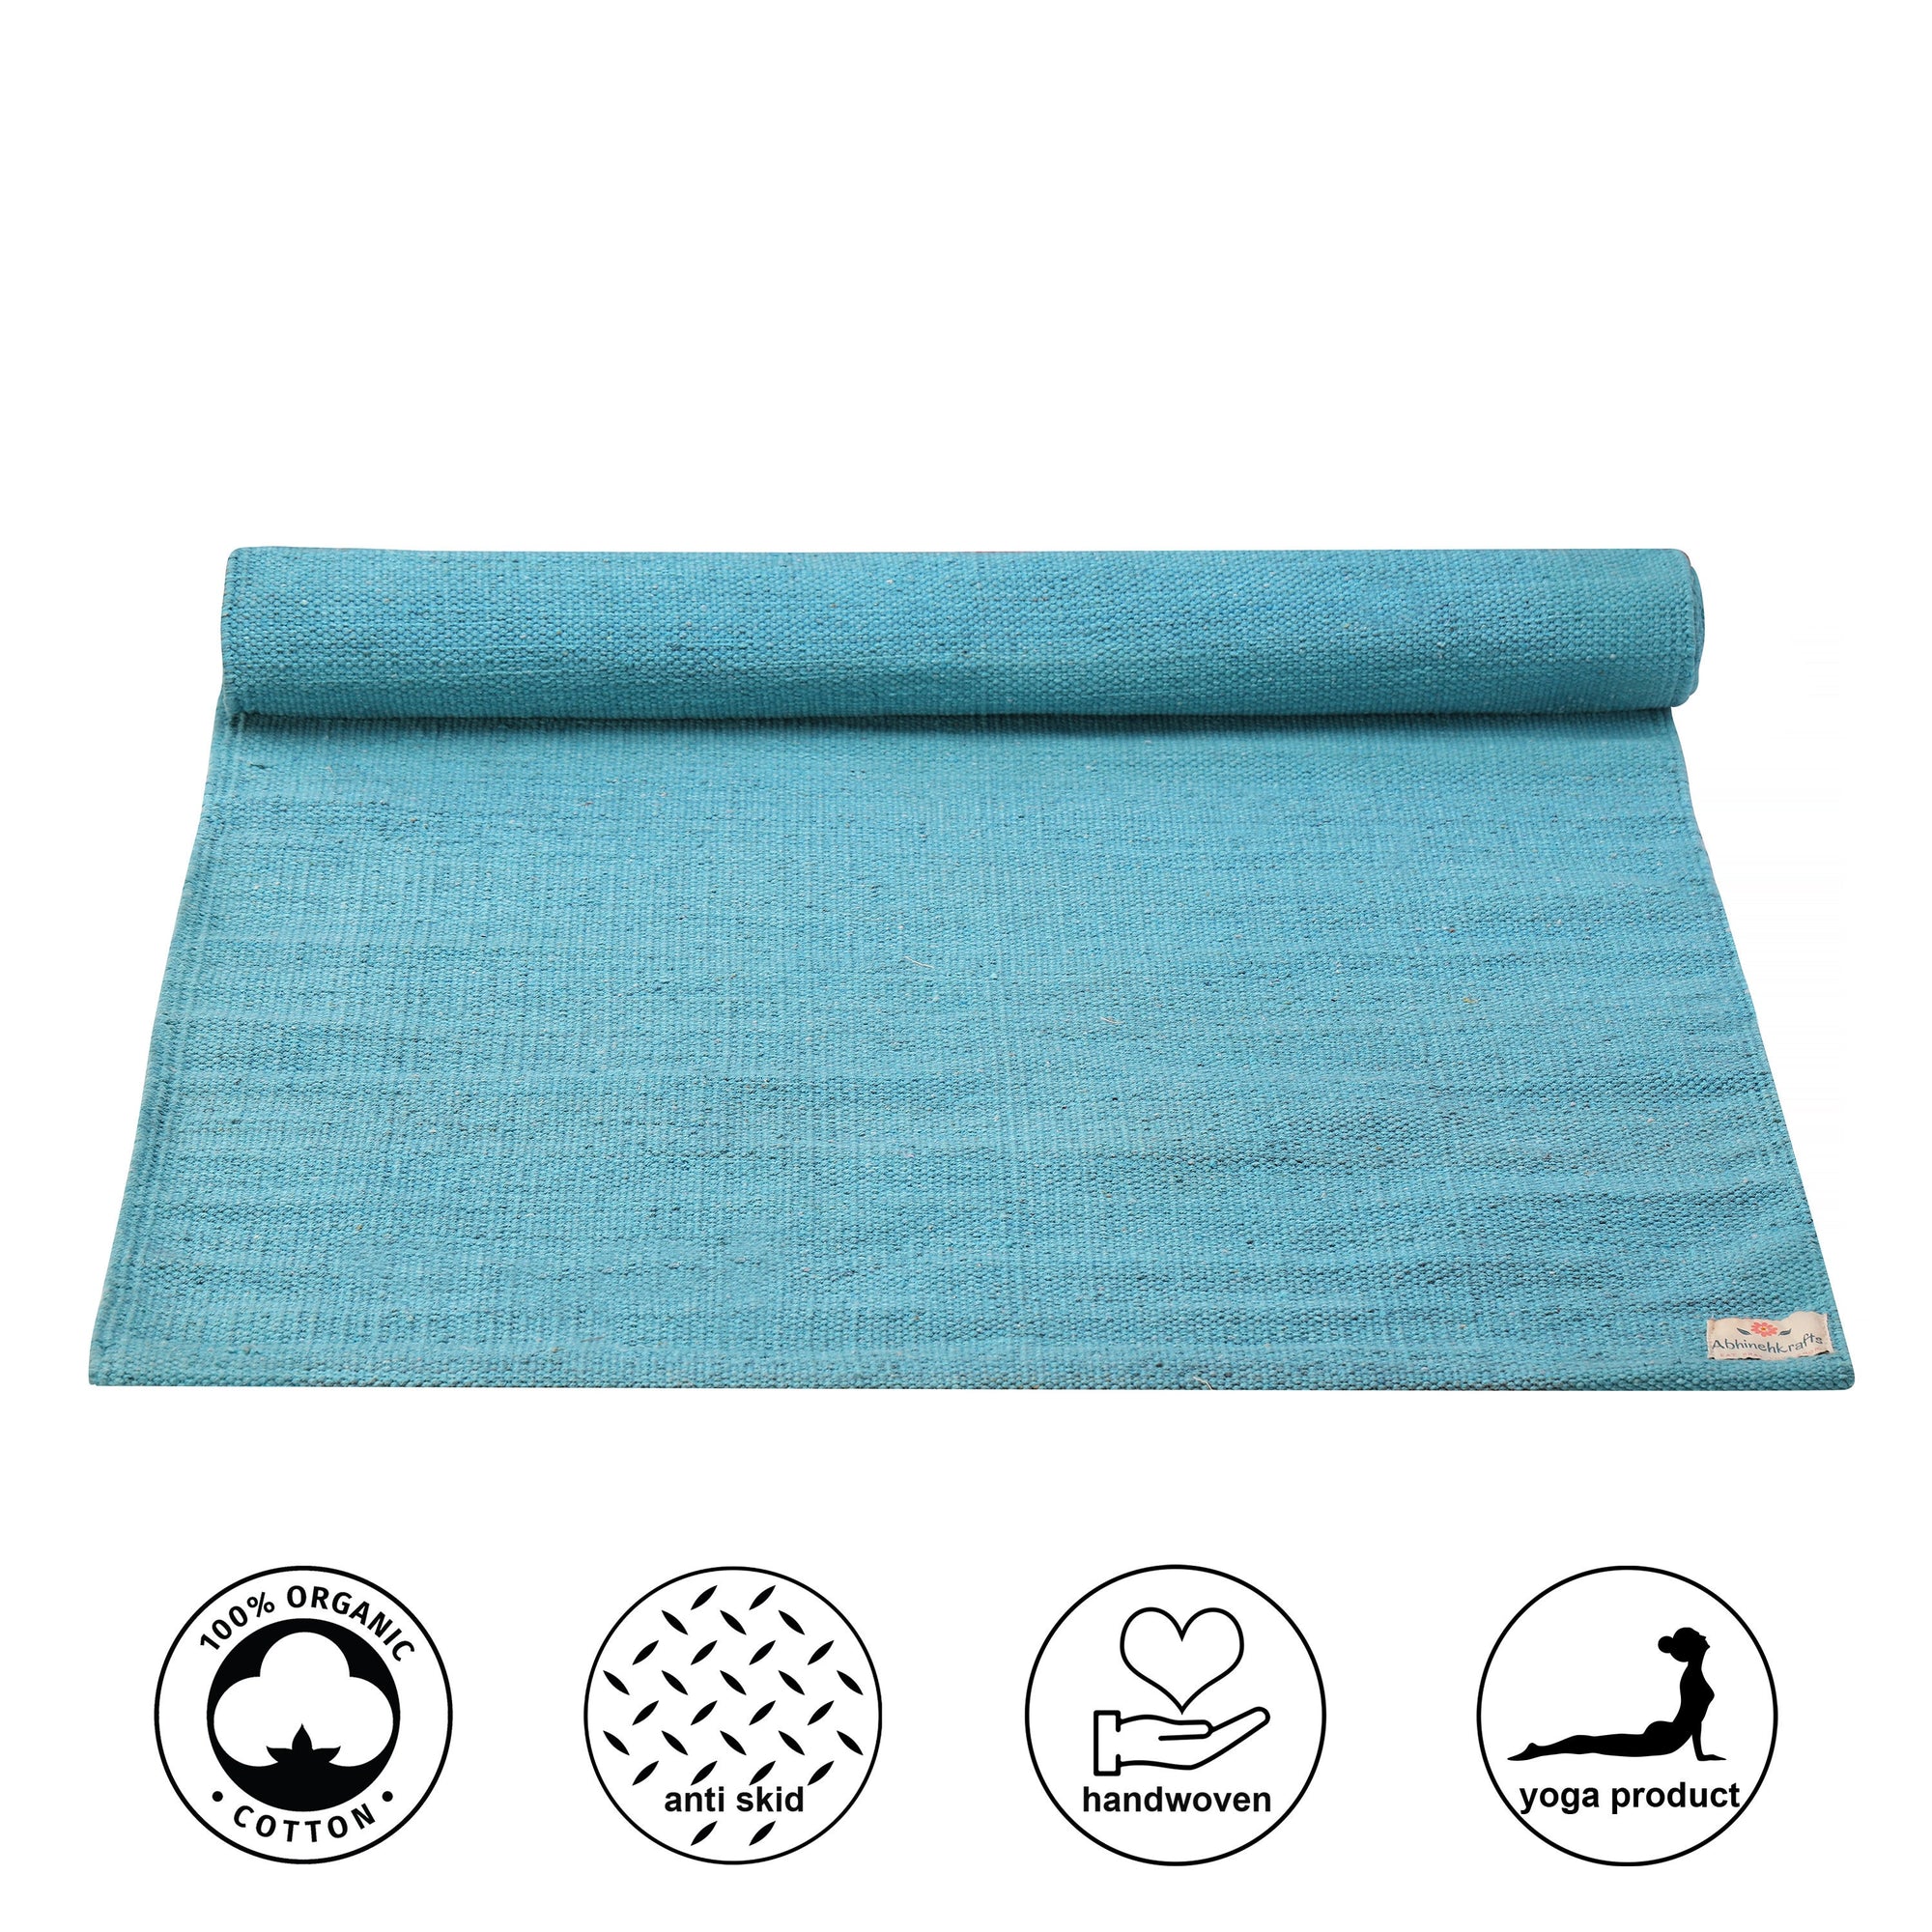 Yoga Mats - Organic Natural Cotton Mat-Yoga, Pilates, Fitness, and Meditation - (Handwoven, anti-skid & firm grip) - Color Options Available